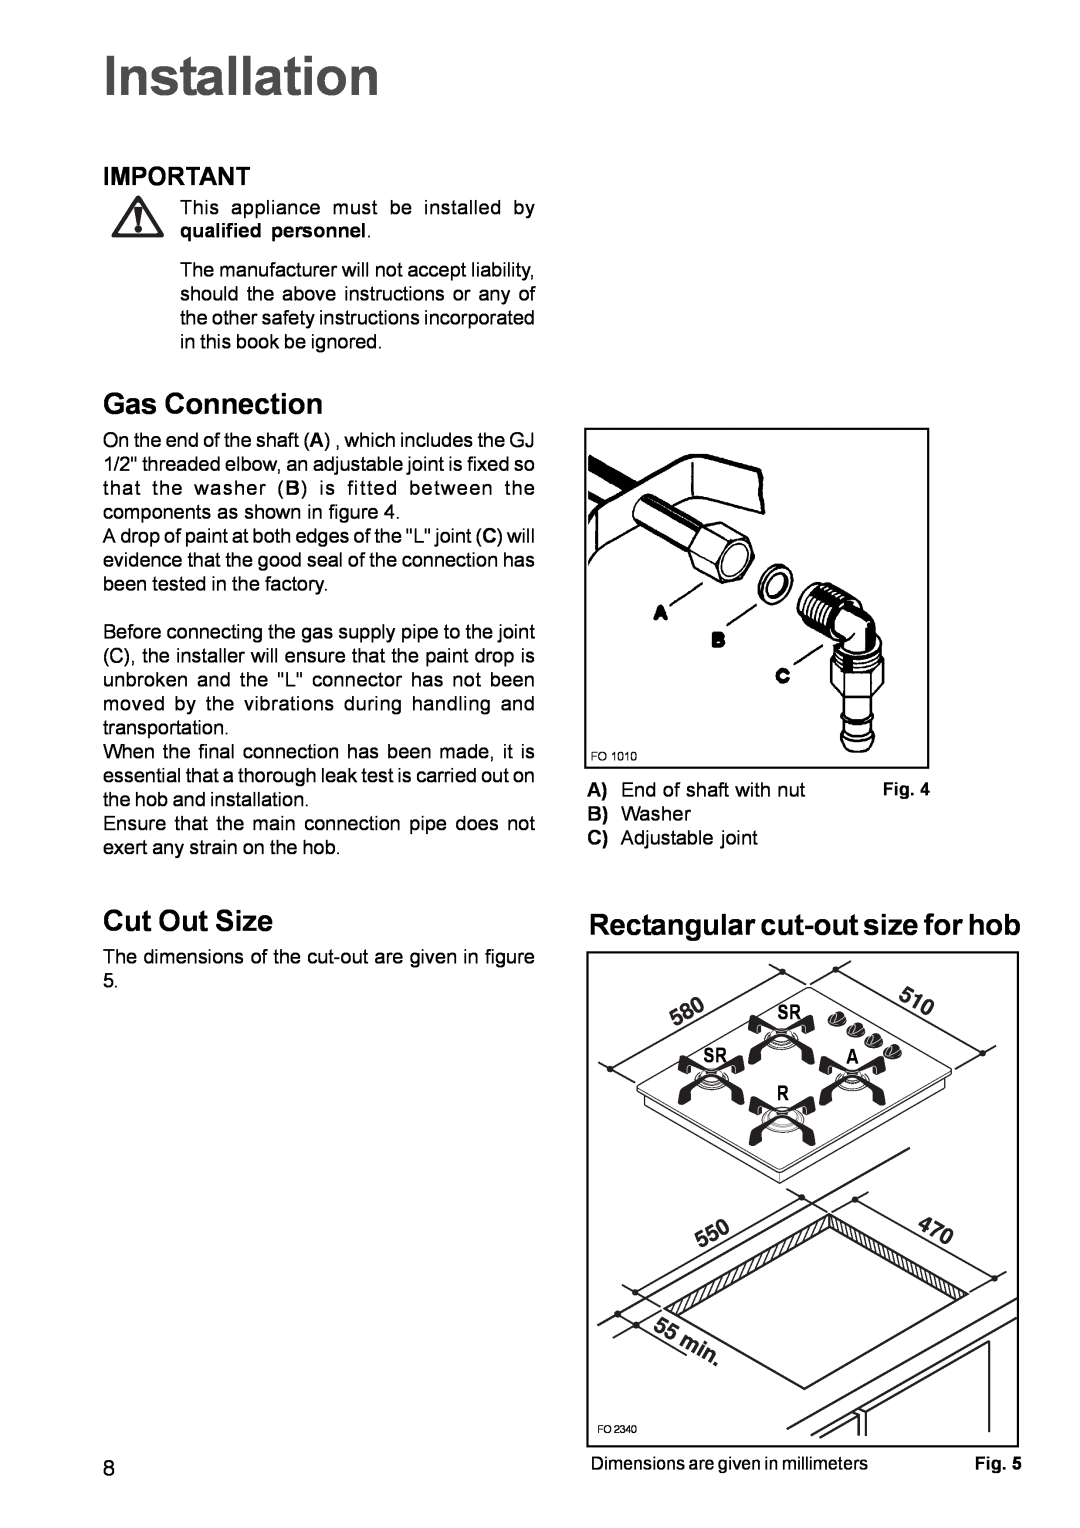 Zanussi ZGG 659 manual Installation, Gas Connection, Cut Out Size, Rectangular cut-out size for hob 